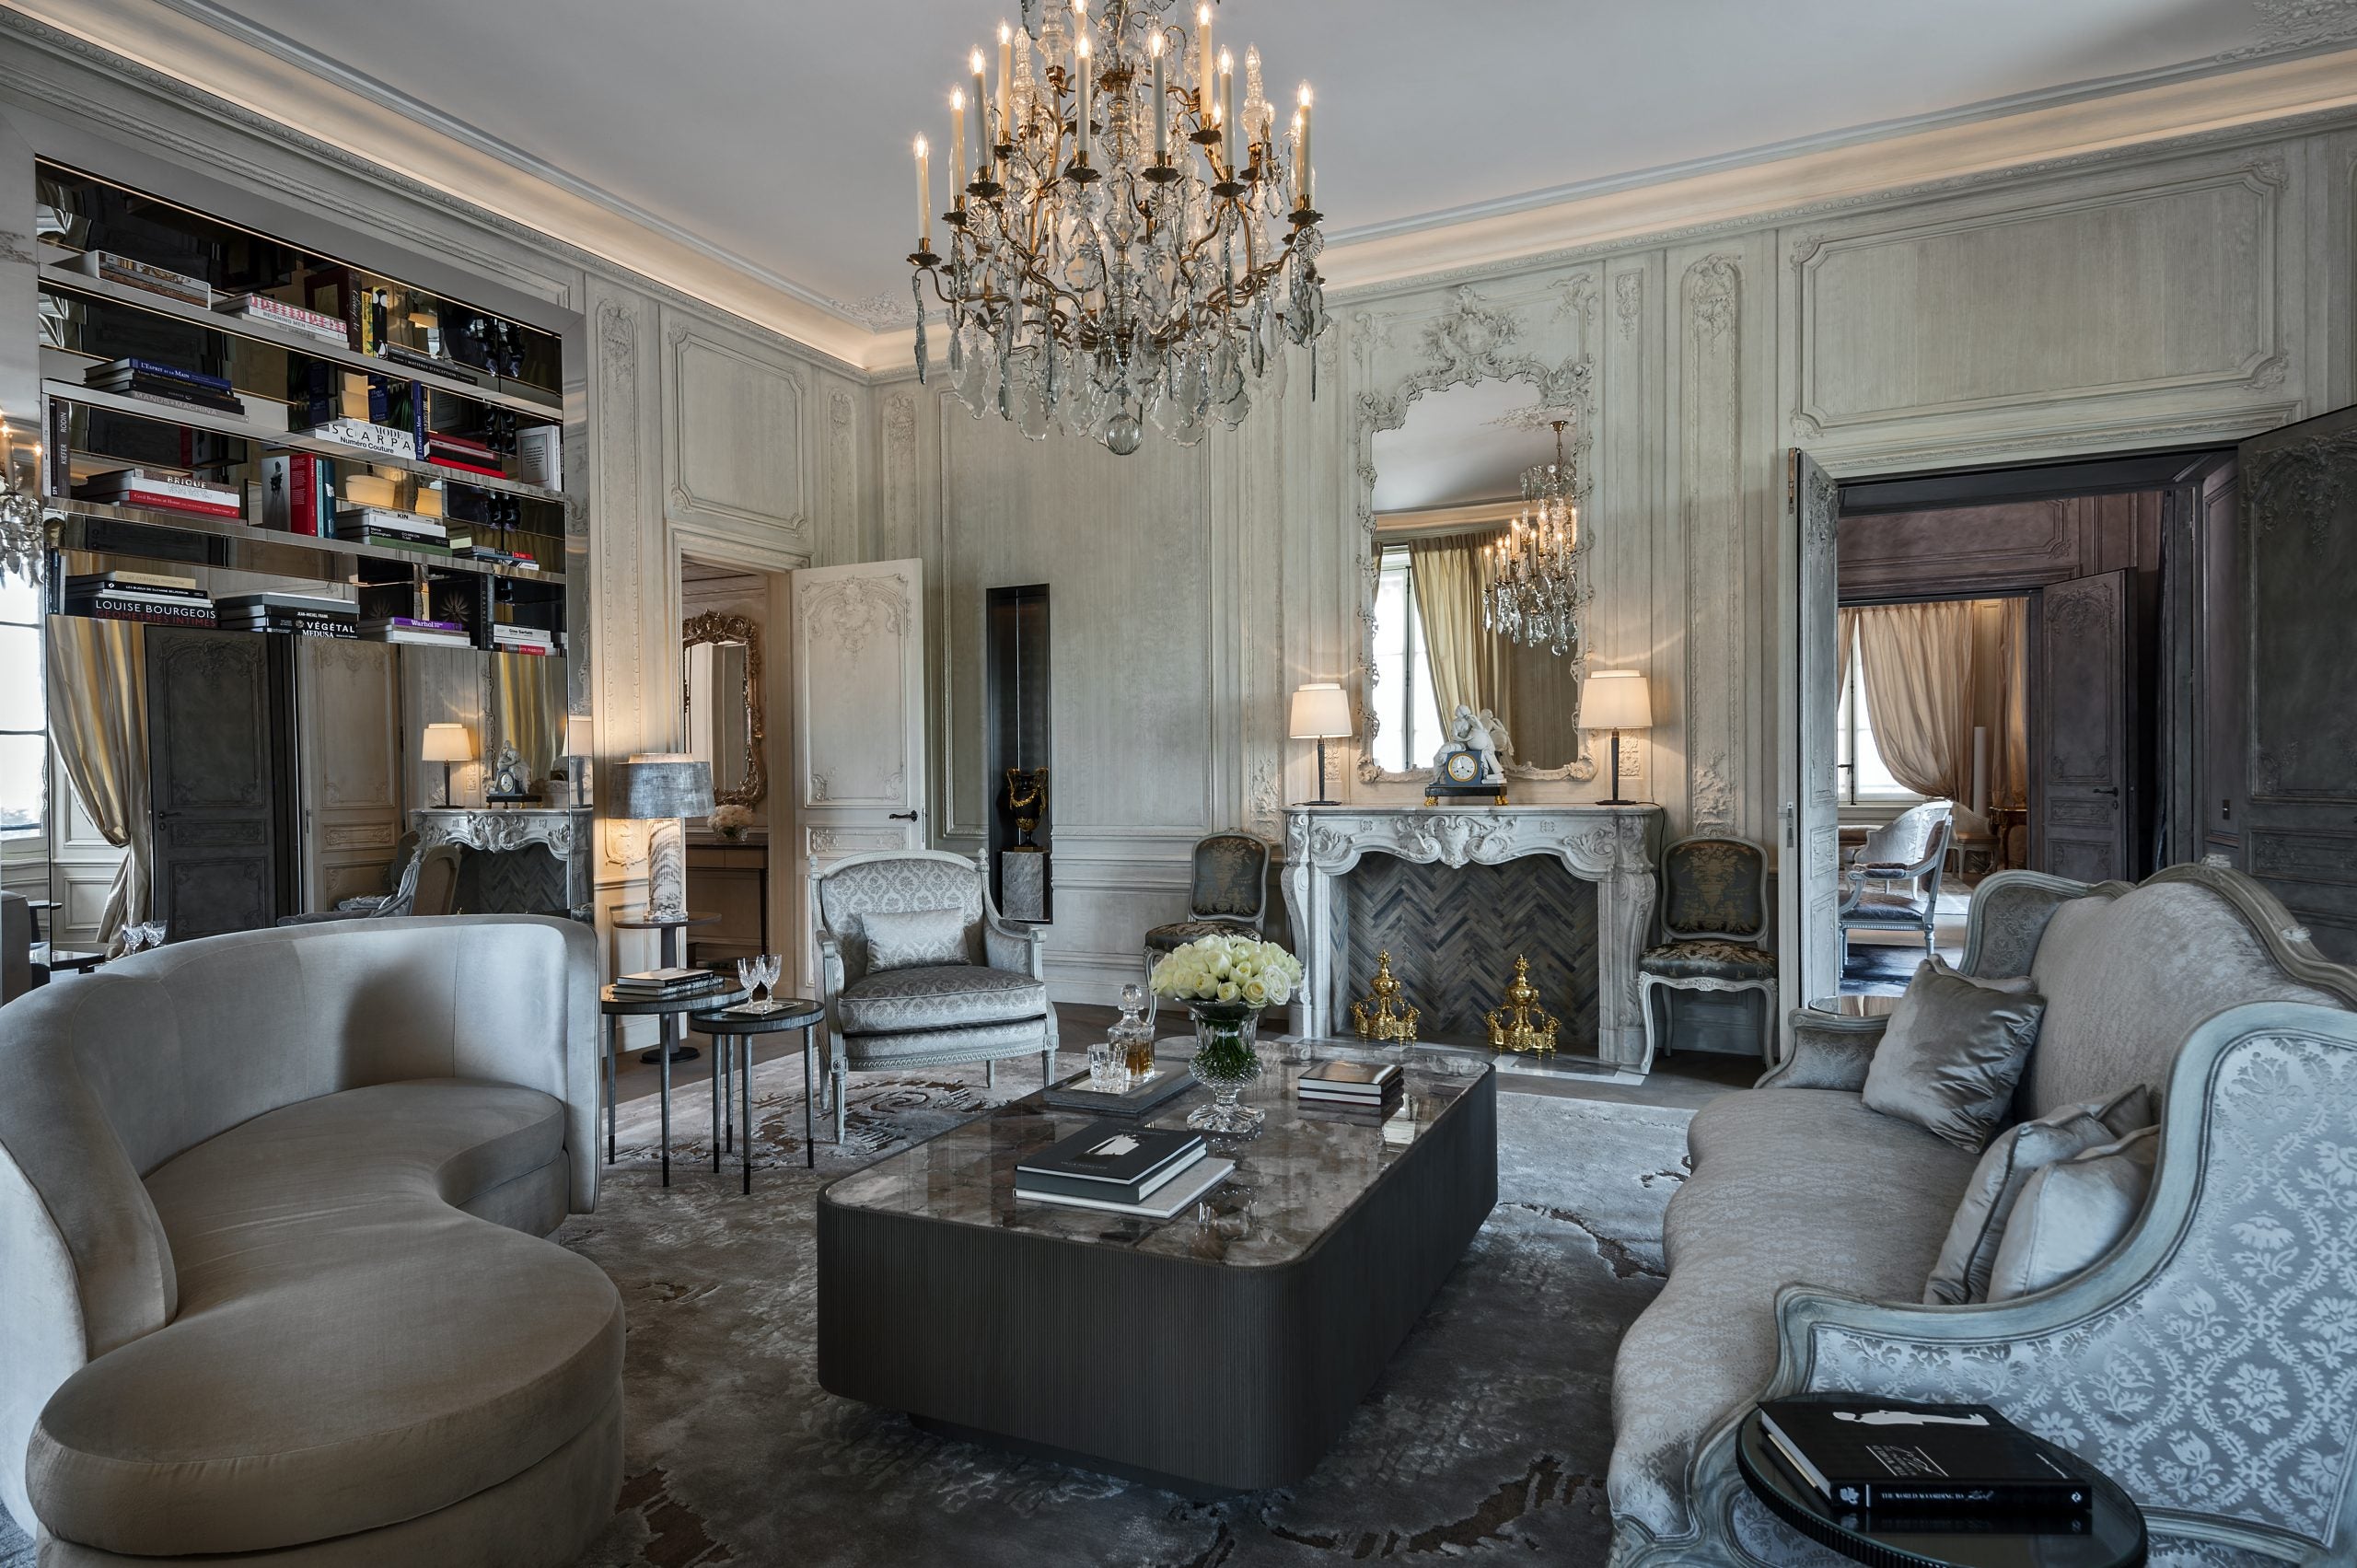 Home Style: A Landmark Parisian Hotel With Suites Designed By A Fashion Powerhouse